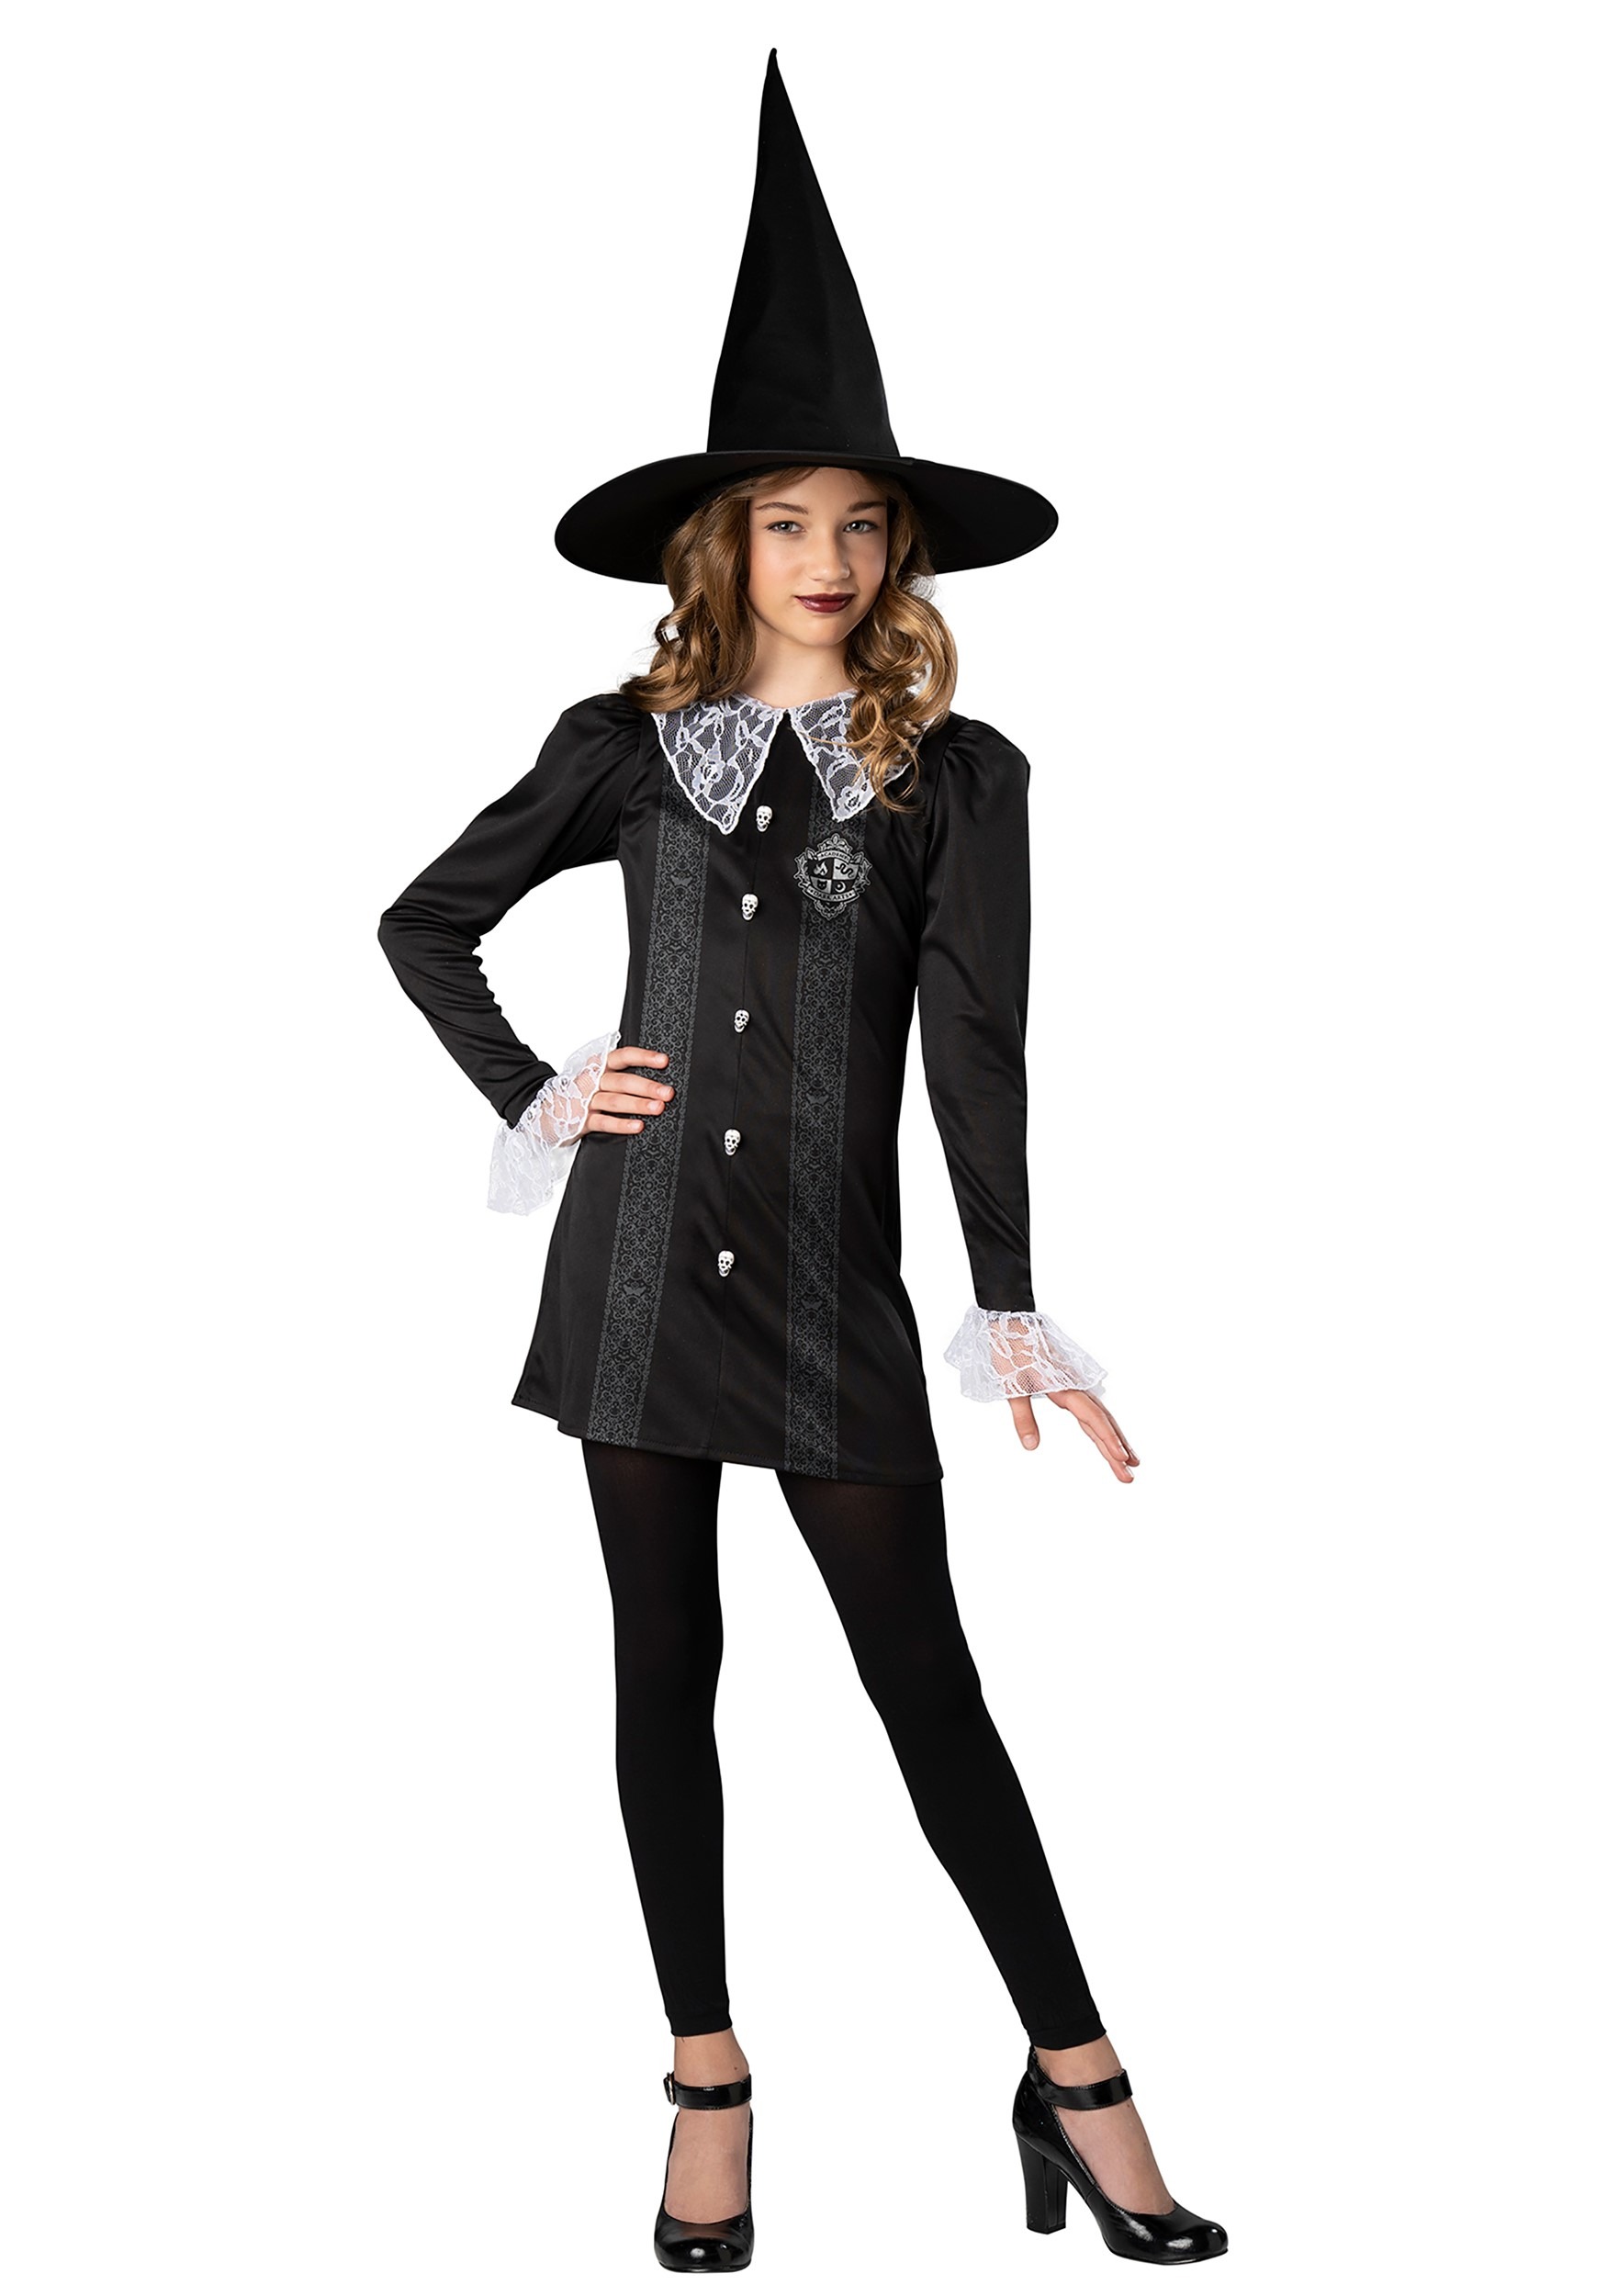 https://images.halloweencostumes.ca/products/66760/1-1/tween-arts-academy-witch-costume.jpg